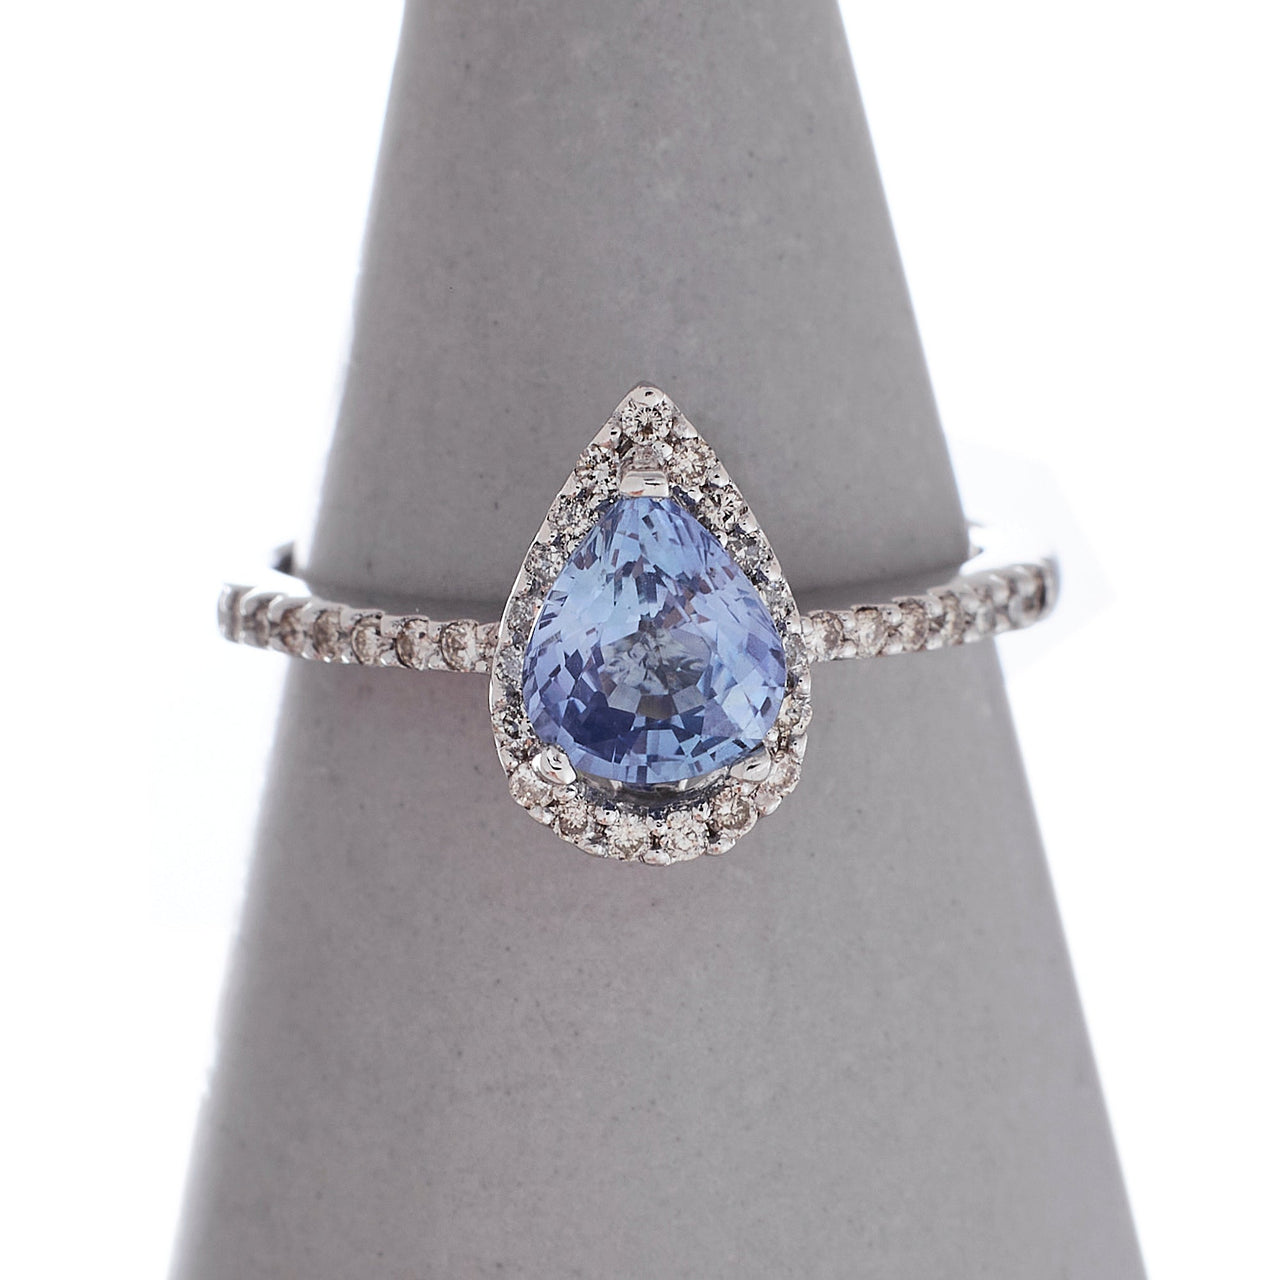 Pre-Owned White Gold Pear Cut Sapphire & Diamond Cluster Ring